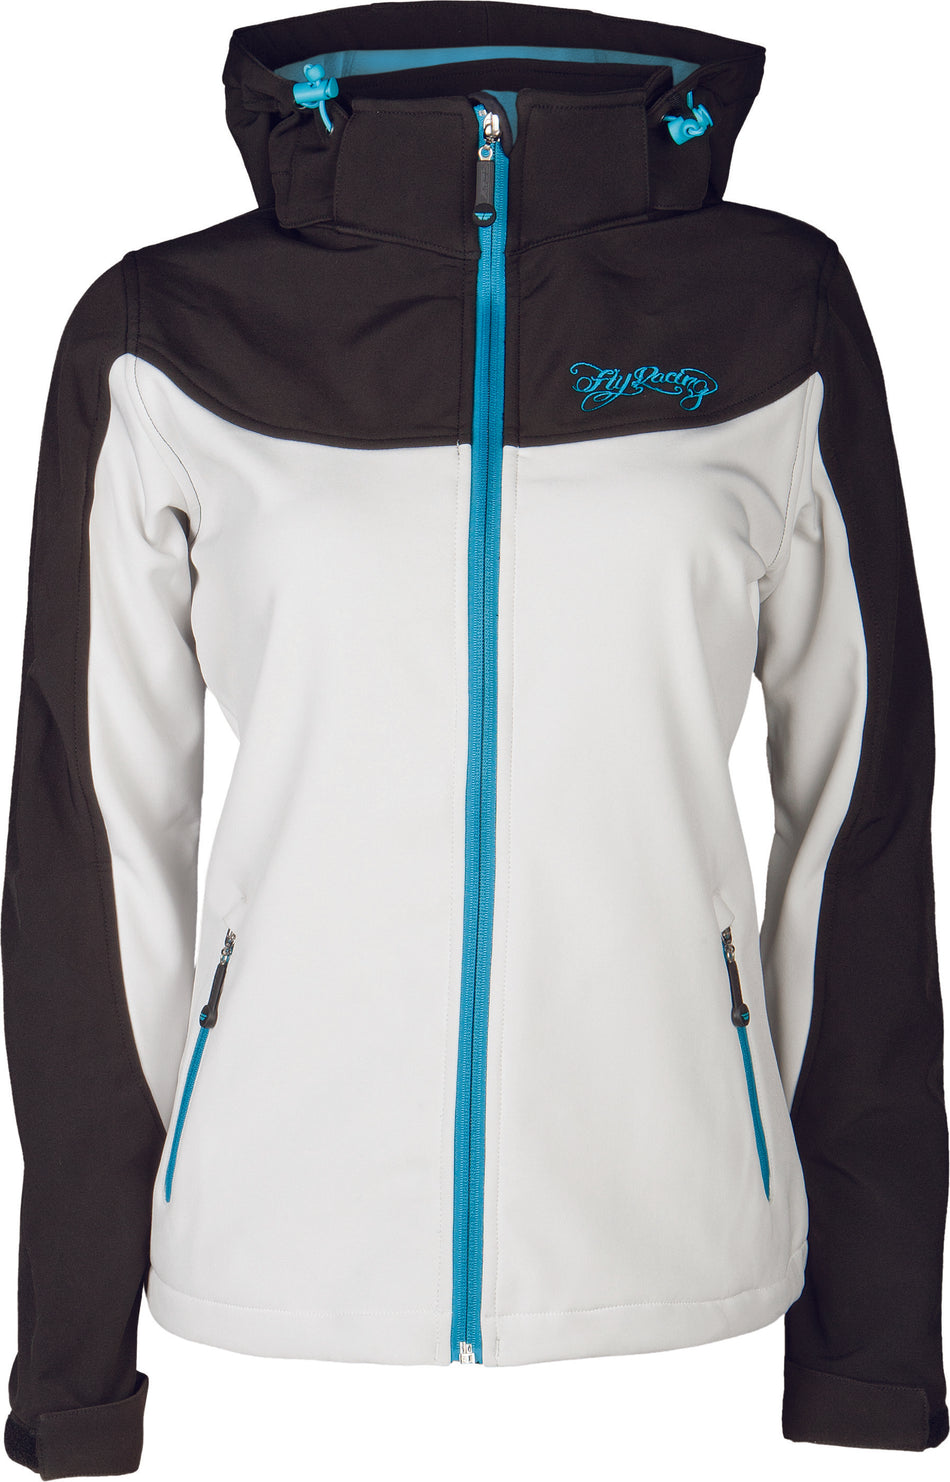 FLY RACING Pinned & Needles Jacket White/Black S 358-5064S